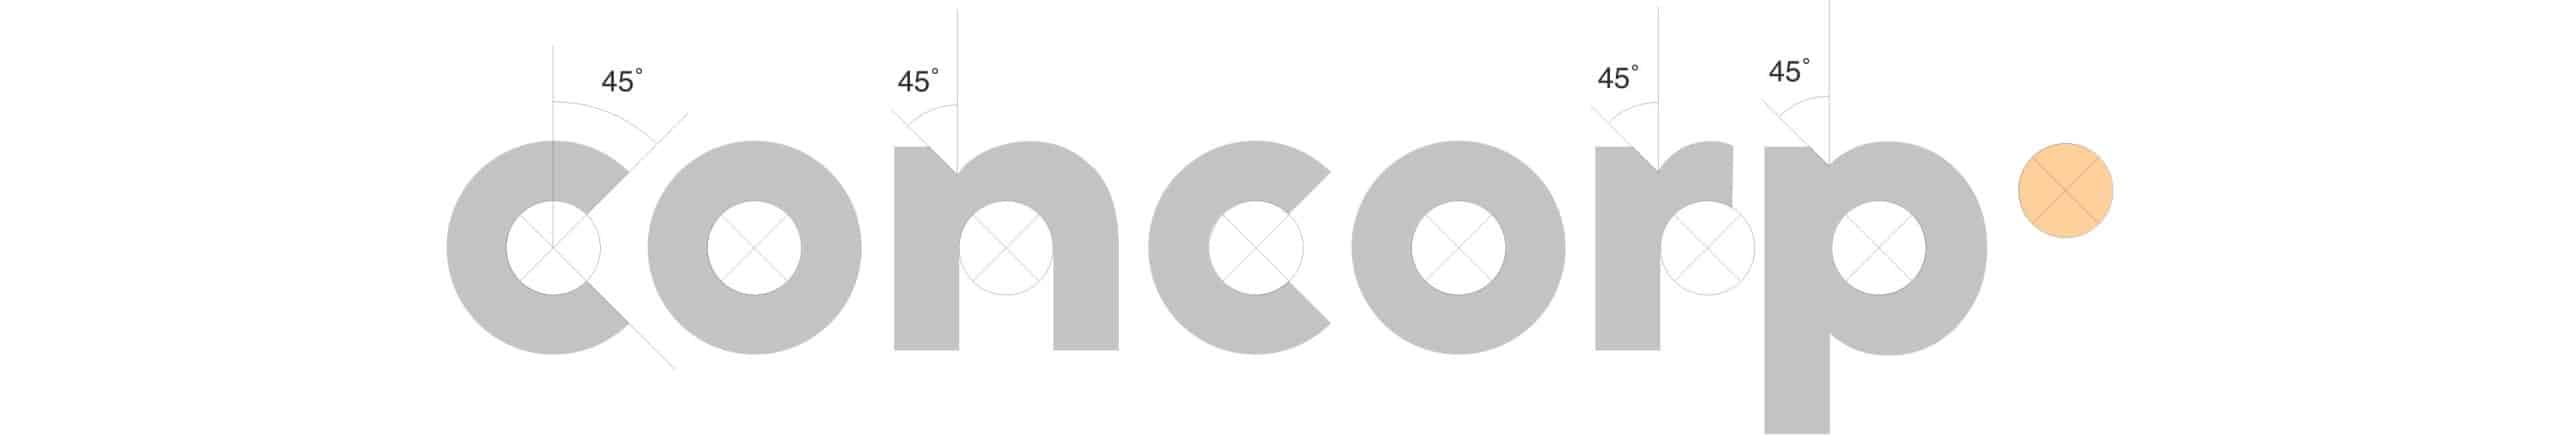 https://circatwee.nl/wp-content/uploads/2023/02/concorp_logo_45-scaled.jpg